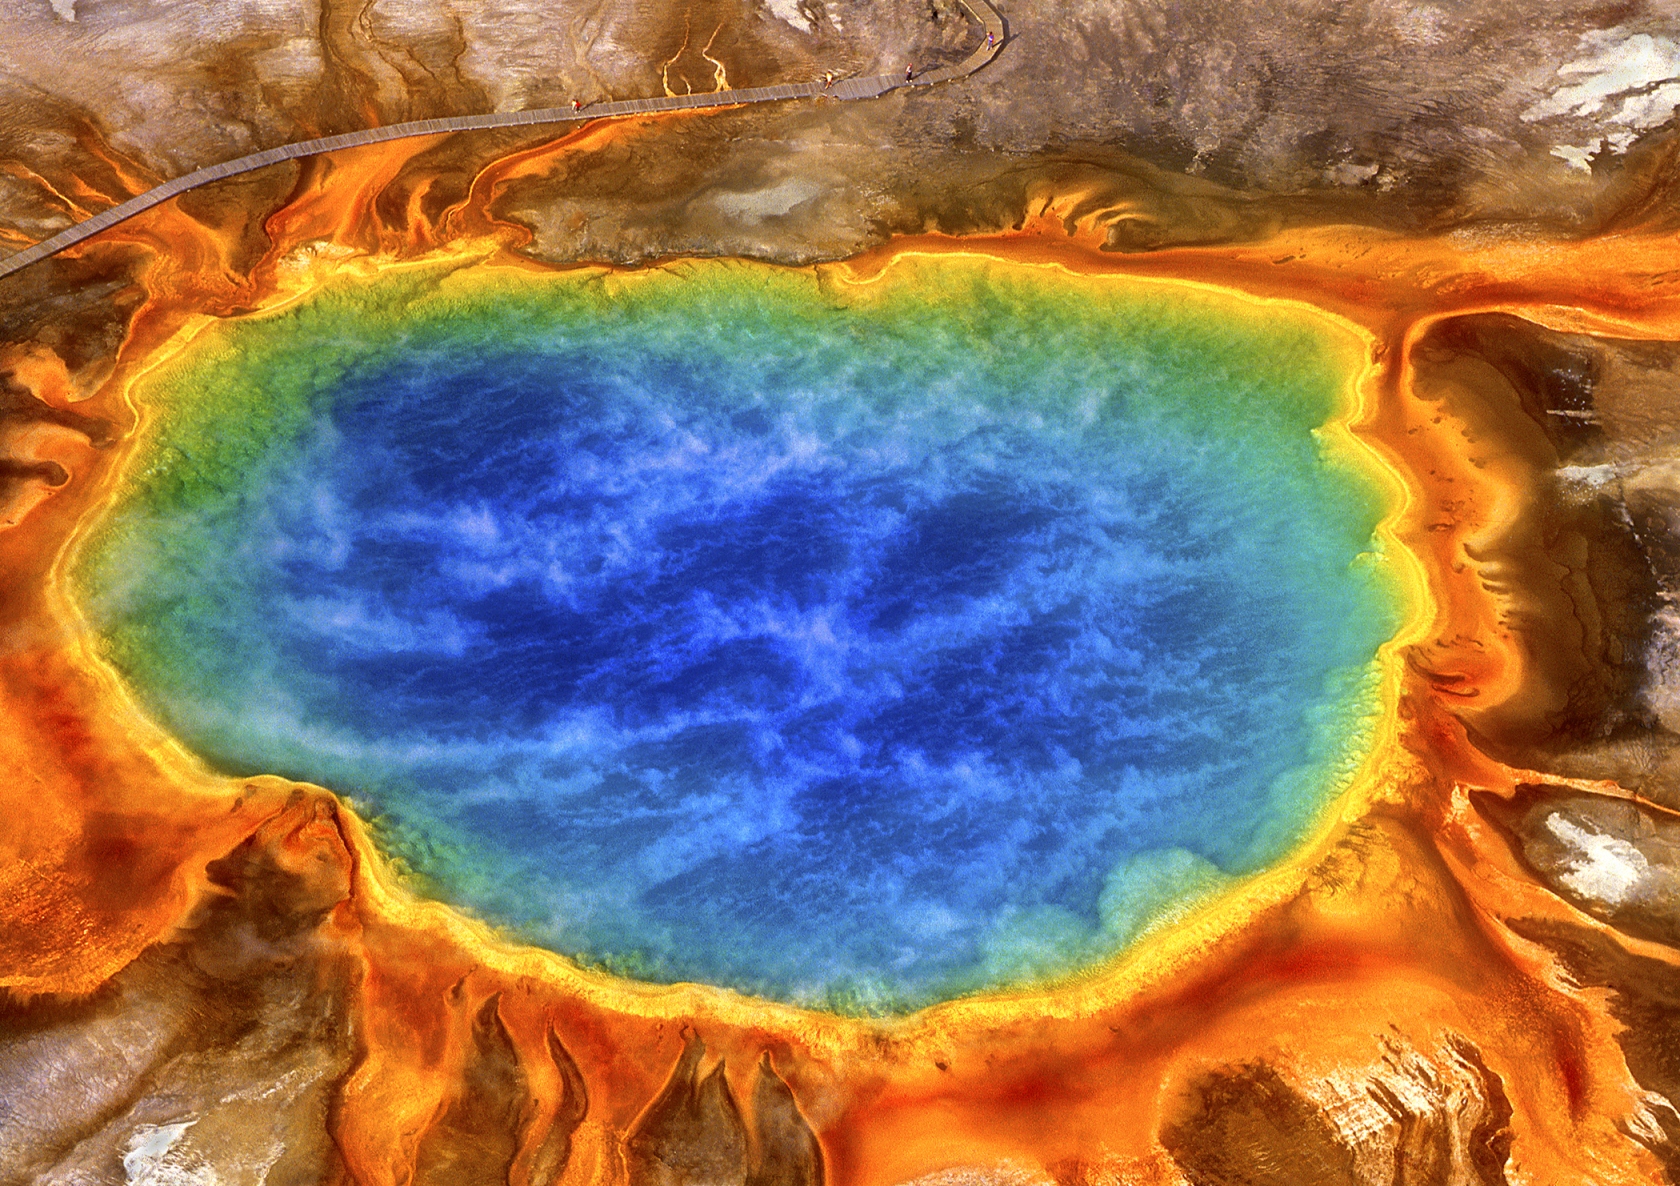 Grand Prismatic Spring in Yellowstone National Park. Photo by Raymond Gehman.